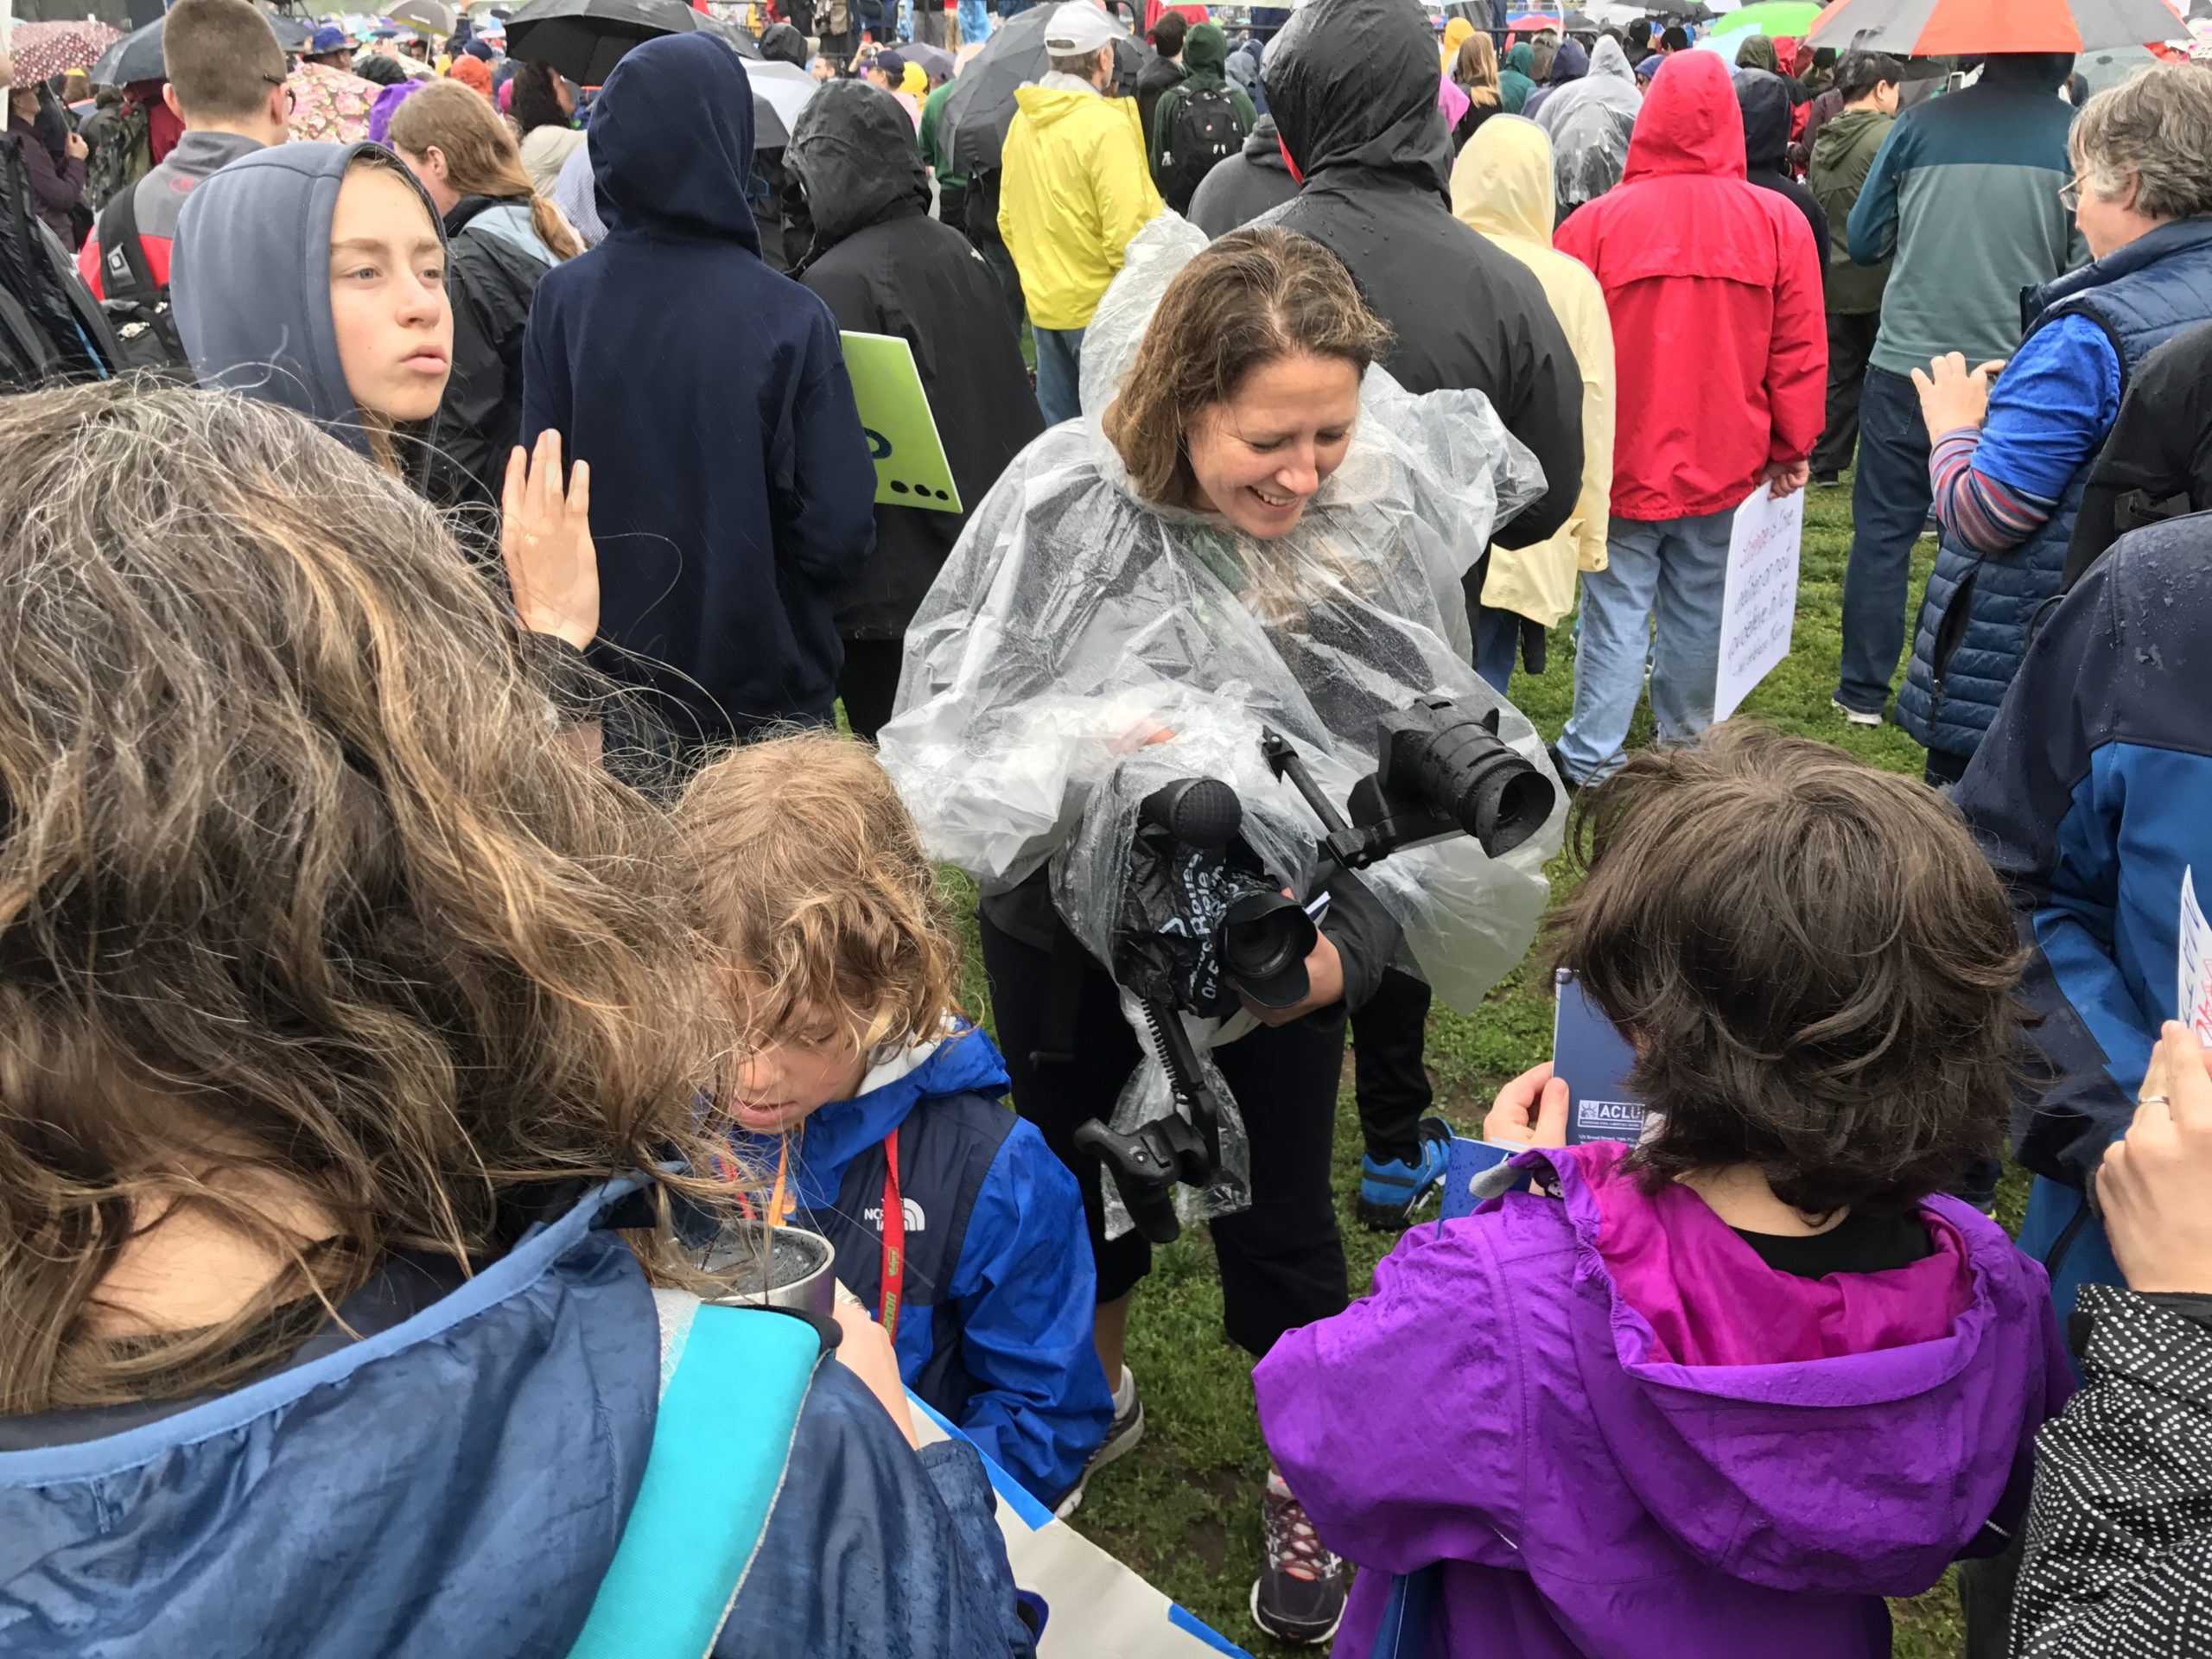 Christi Cooper filming at a science march.